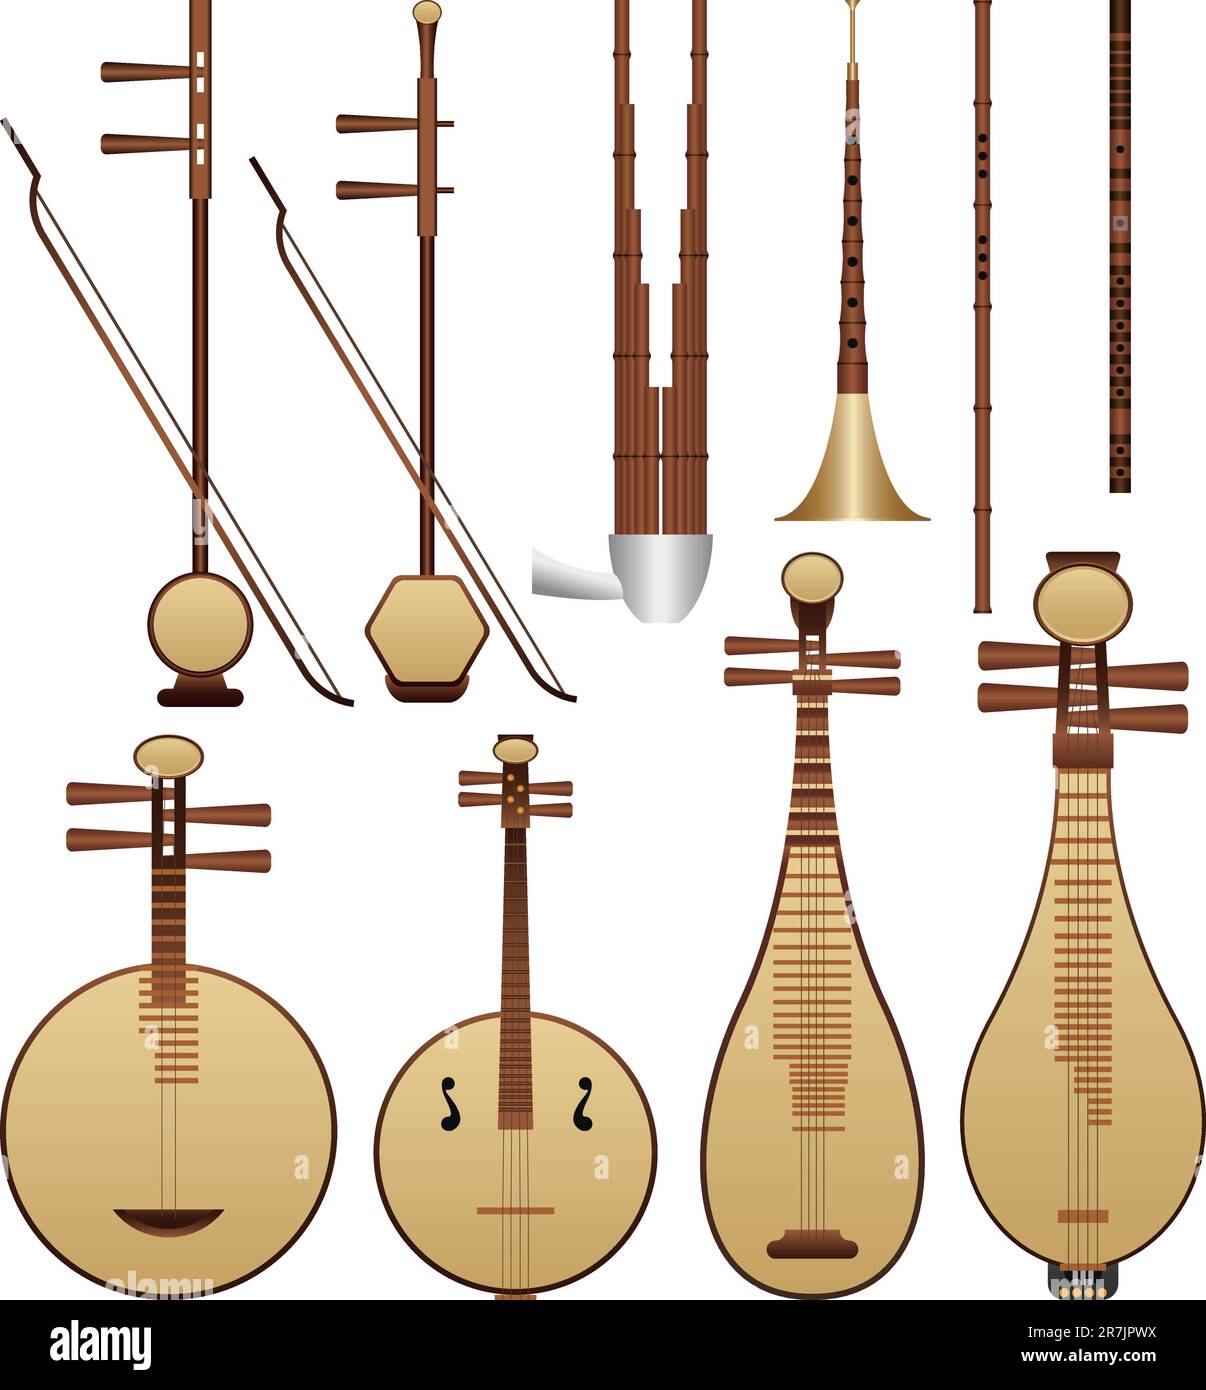 Layered vector illustration of different kinds of Chinese Musical Instruments. Stock Vector